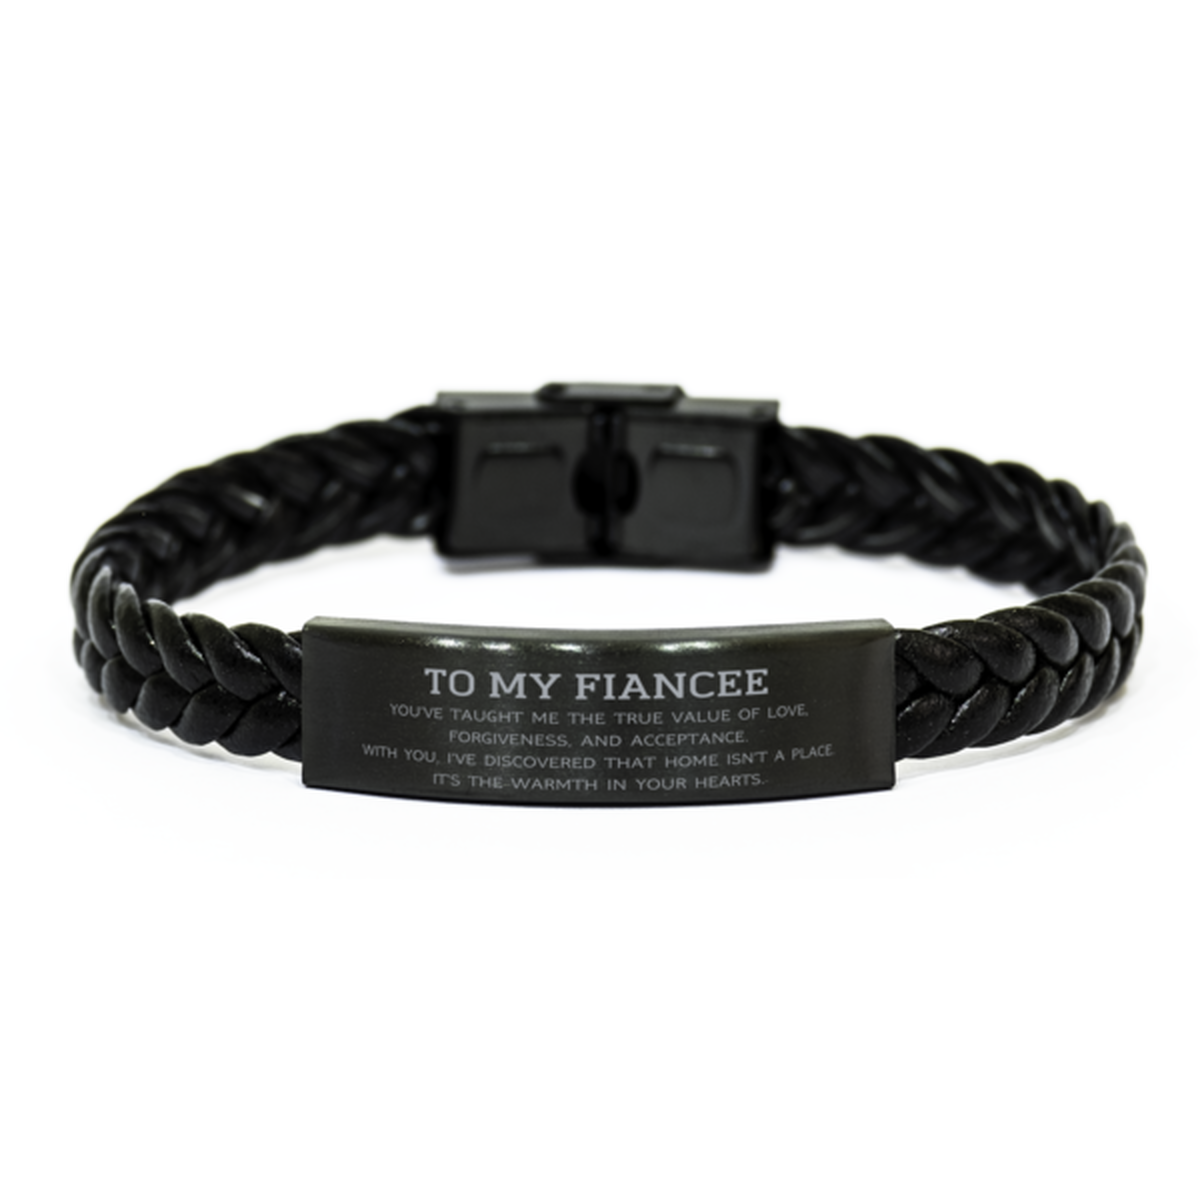 To My Fiancee Gifts, You've taught me the true value of love, Thank You Gifts For Fiancee, Birthday Braided Leather Bracelet For Fiancee